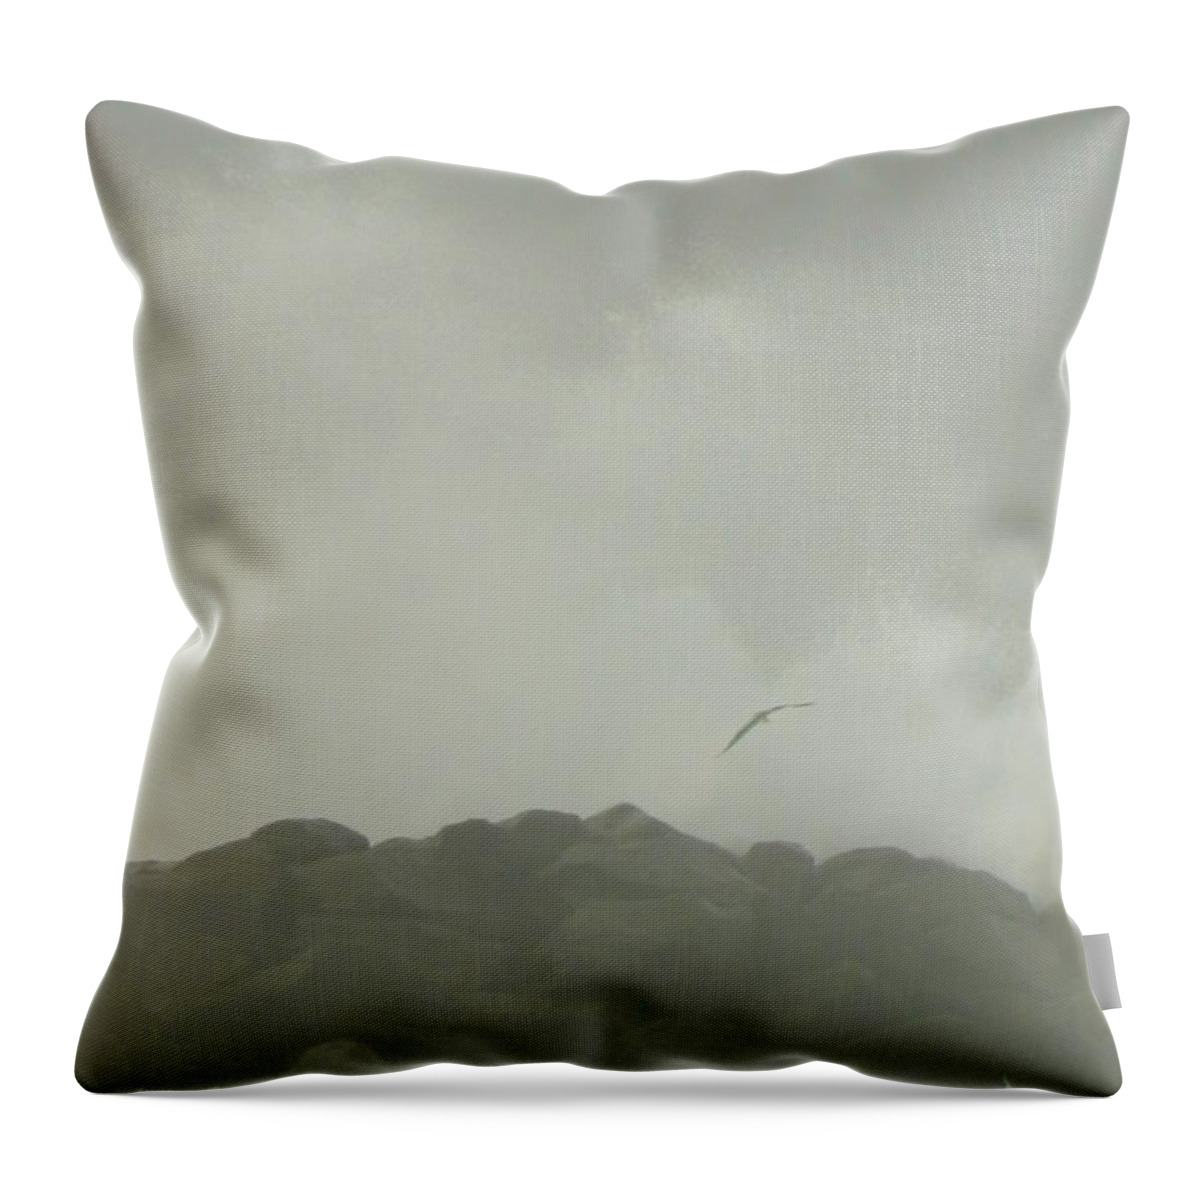 Seagull Throw Pillow featuring the photograph Bird Splash by Gallery Of Hope 